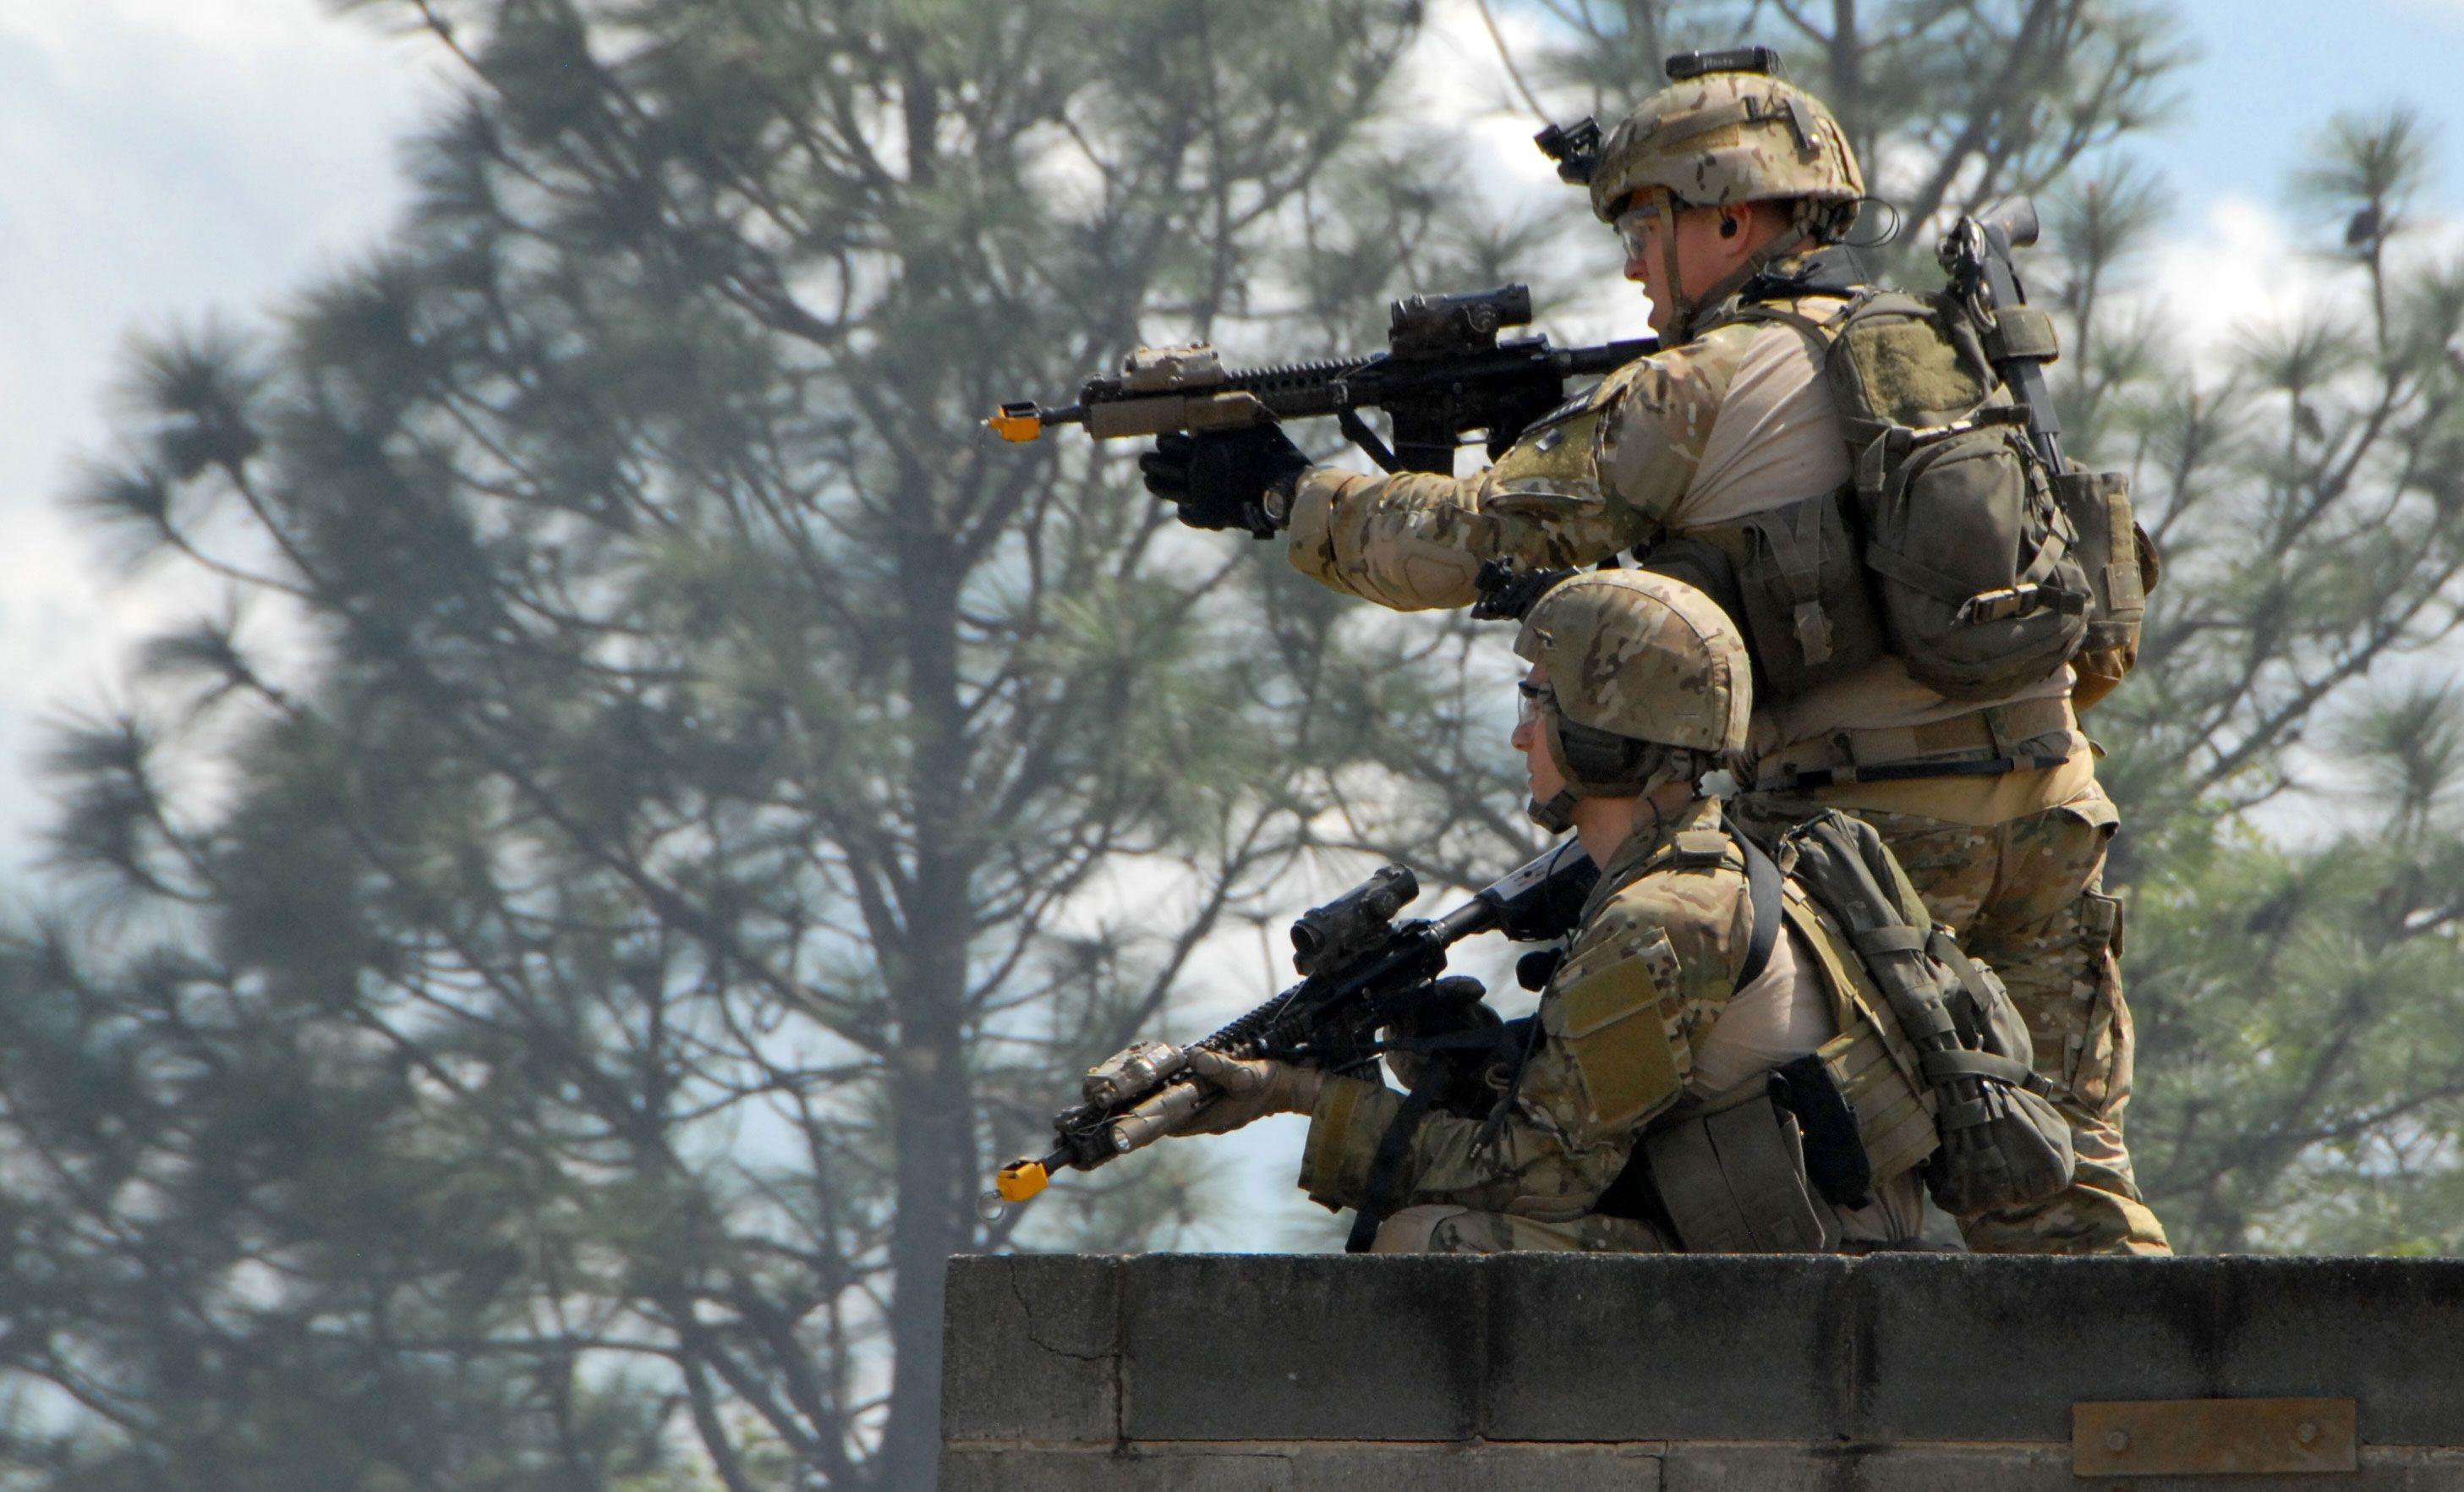 Wallpapers Of Army Ranger Best Cool Hd High Resolution Laptop Amazing.